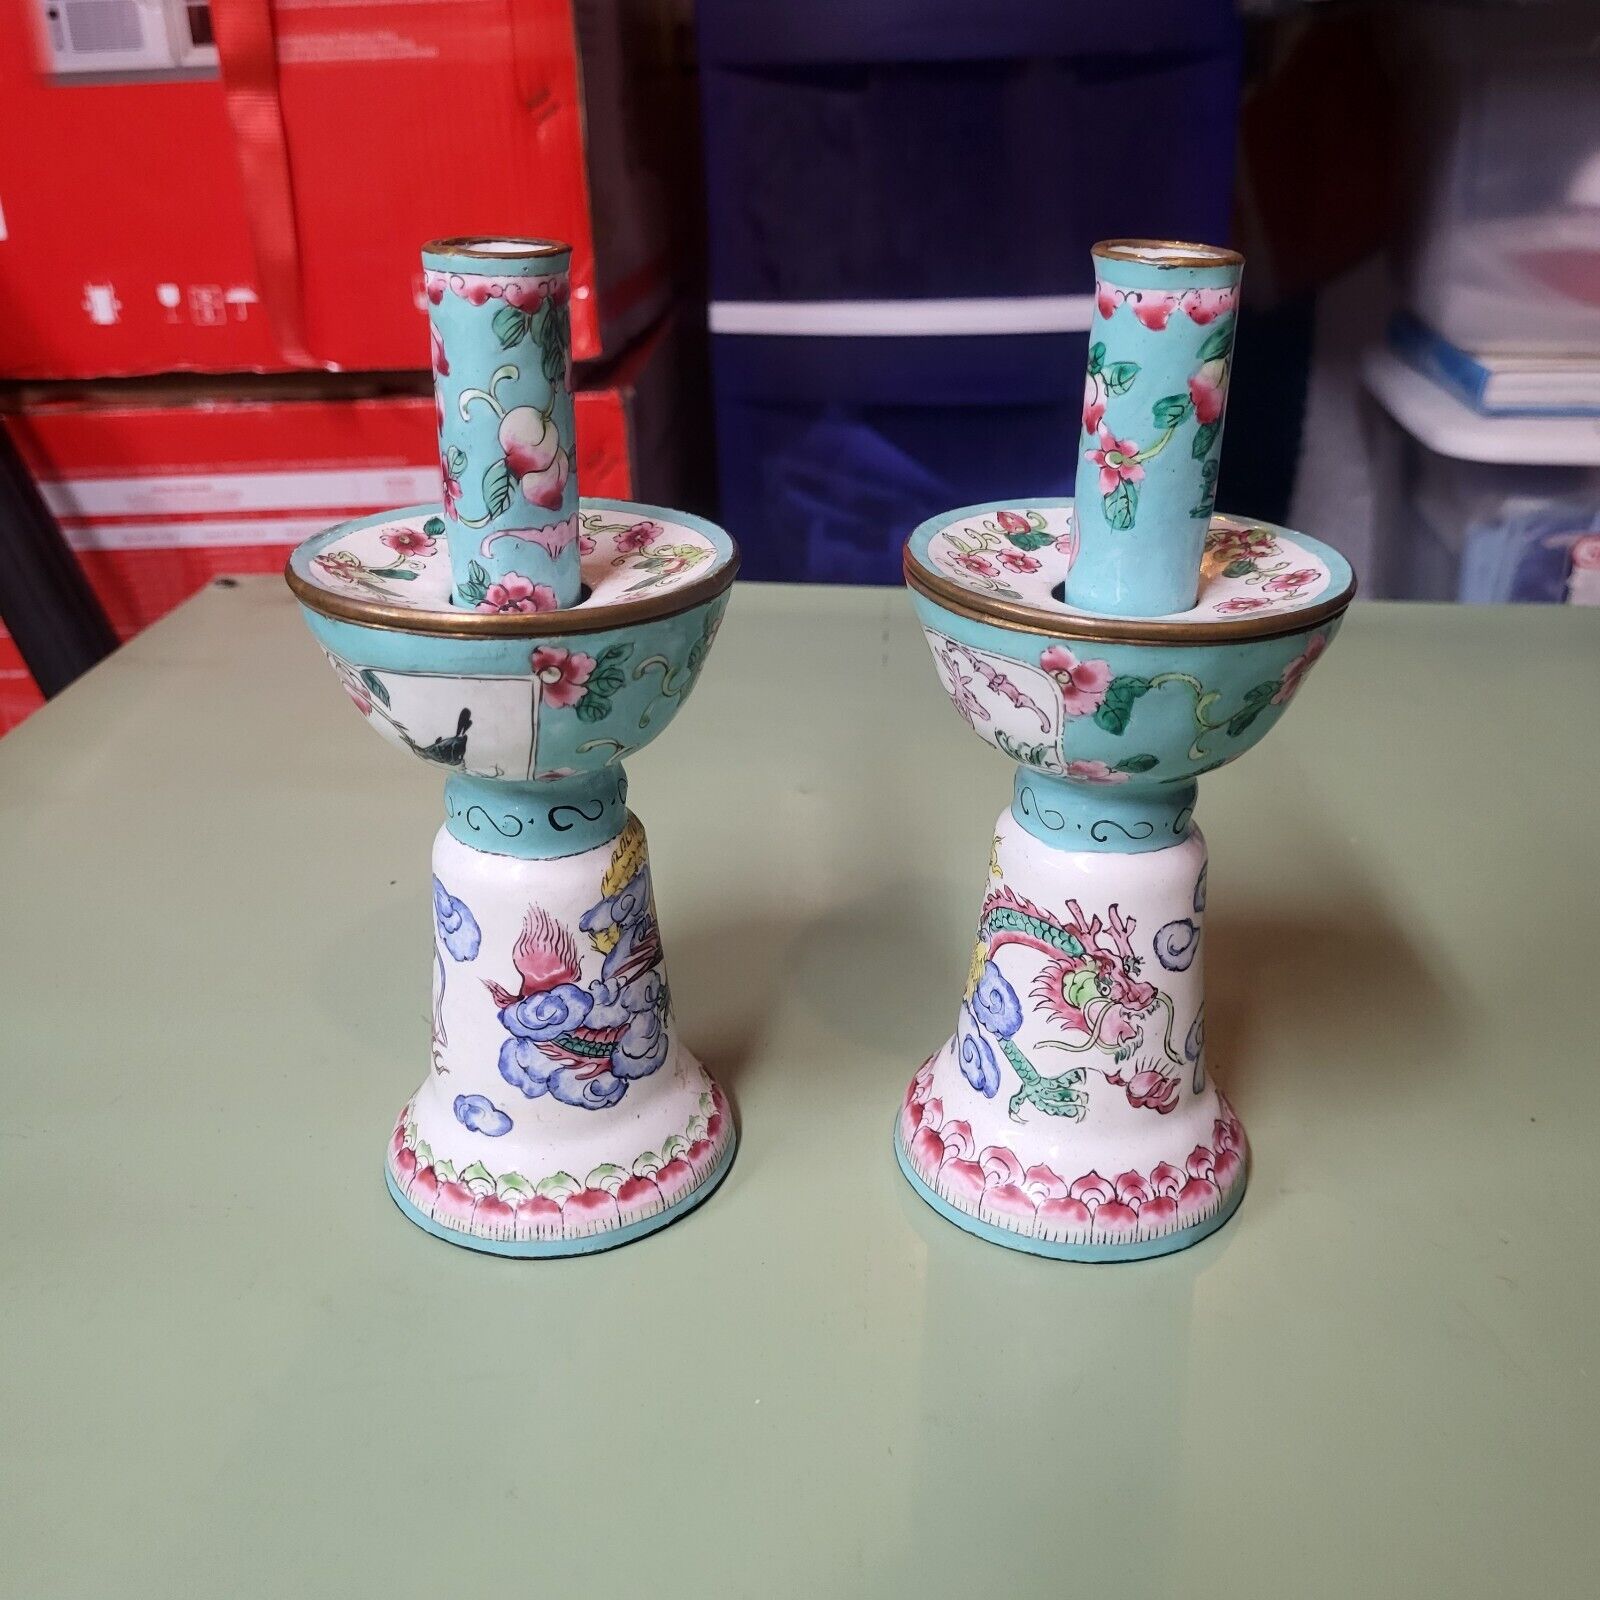 Vintage Asian Chinese Cloisonne Enamel Bronze Brass Candlestick Holders Lot of 2